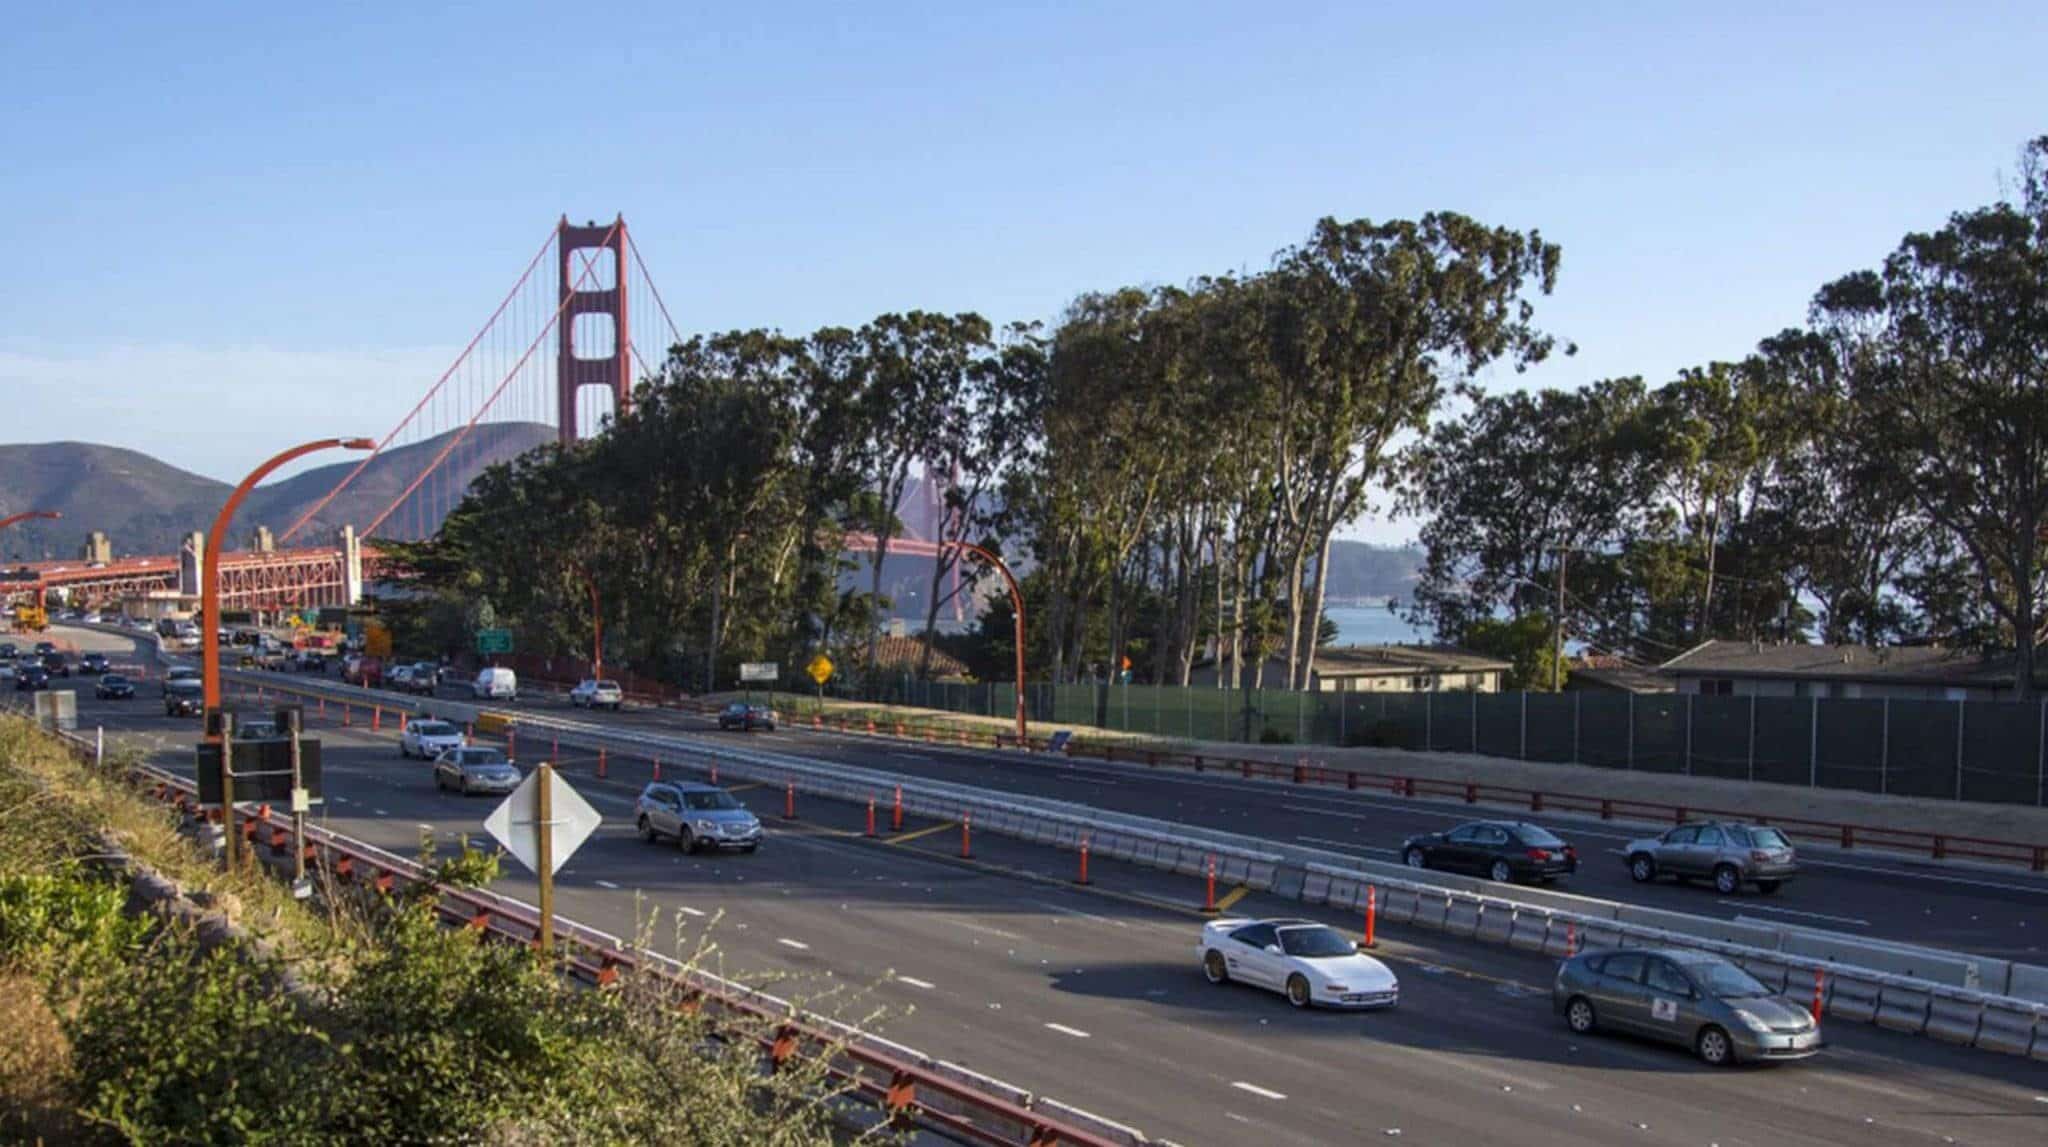 View of Presidio Parkway Road, California, with multiple cars and the Golden Gate Bridge in the distance